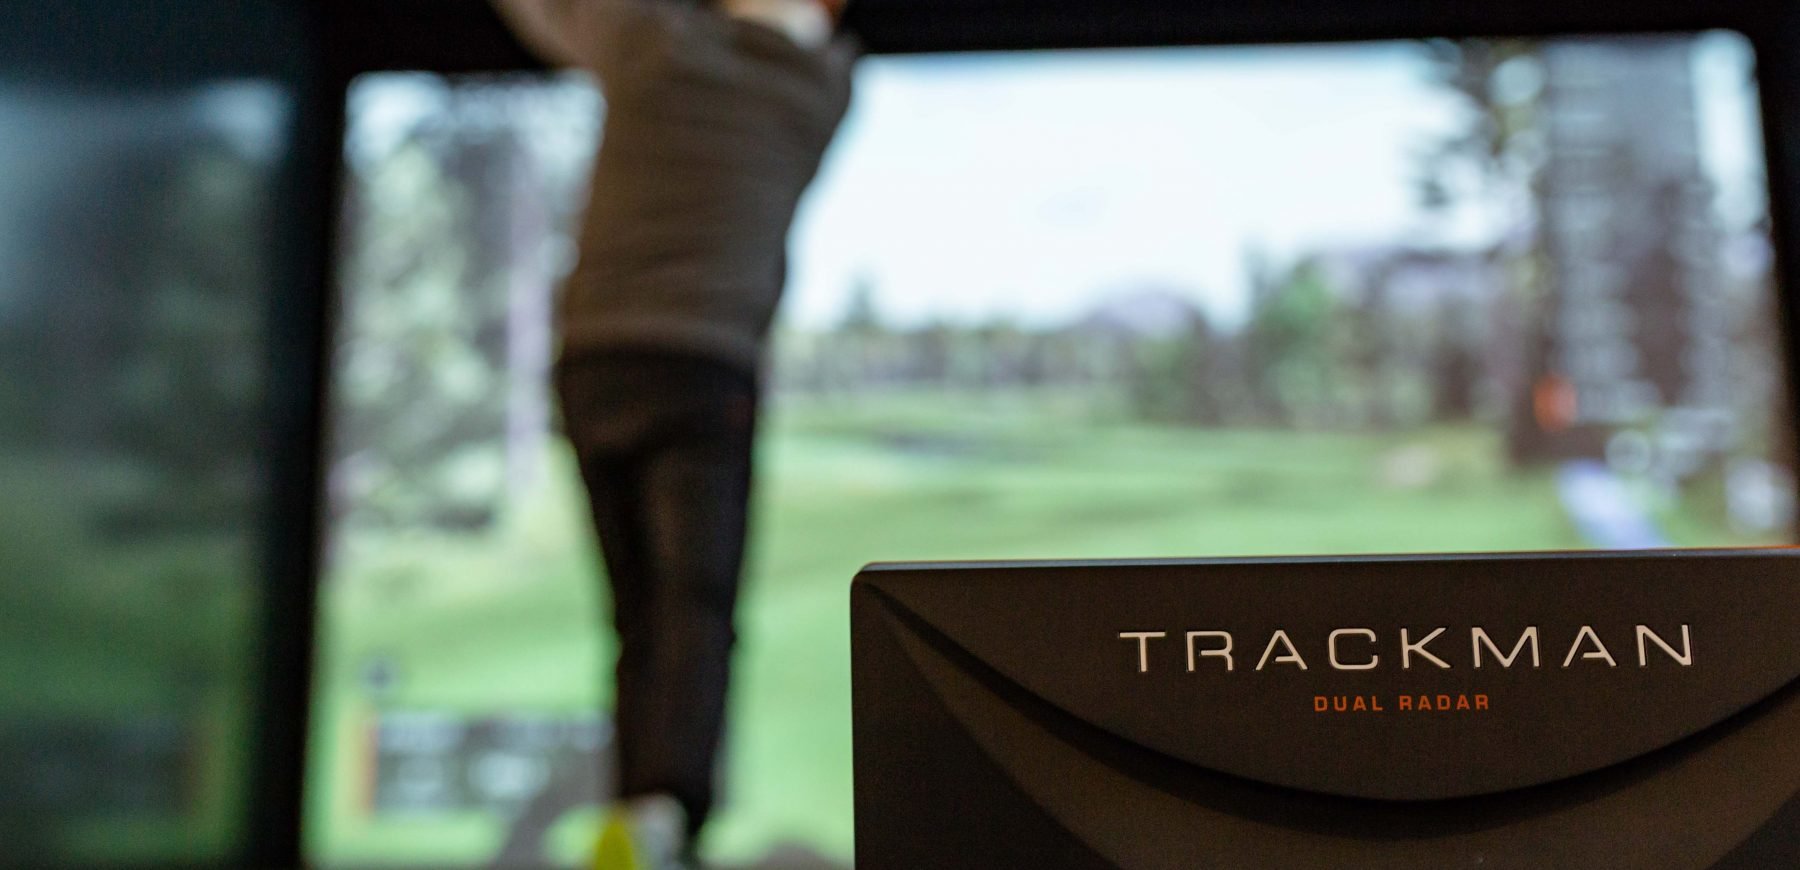 Rear view of a man swinging the golf club next to the Trackman dual radar